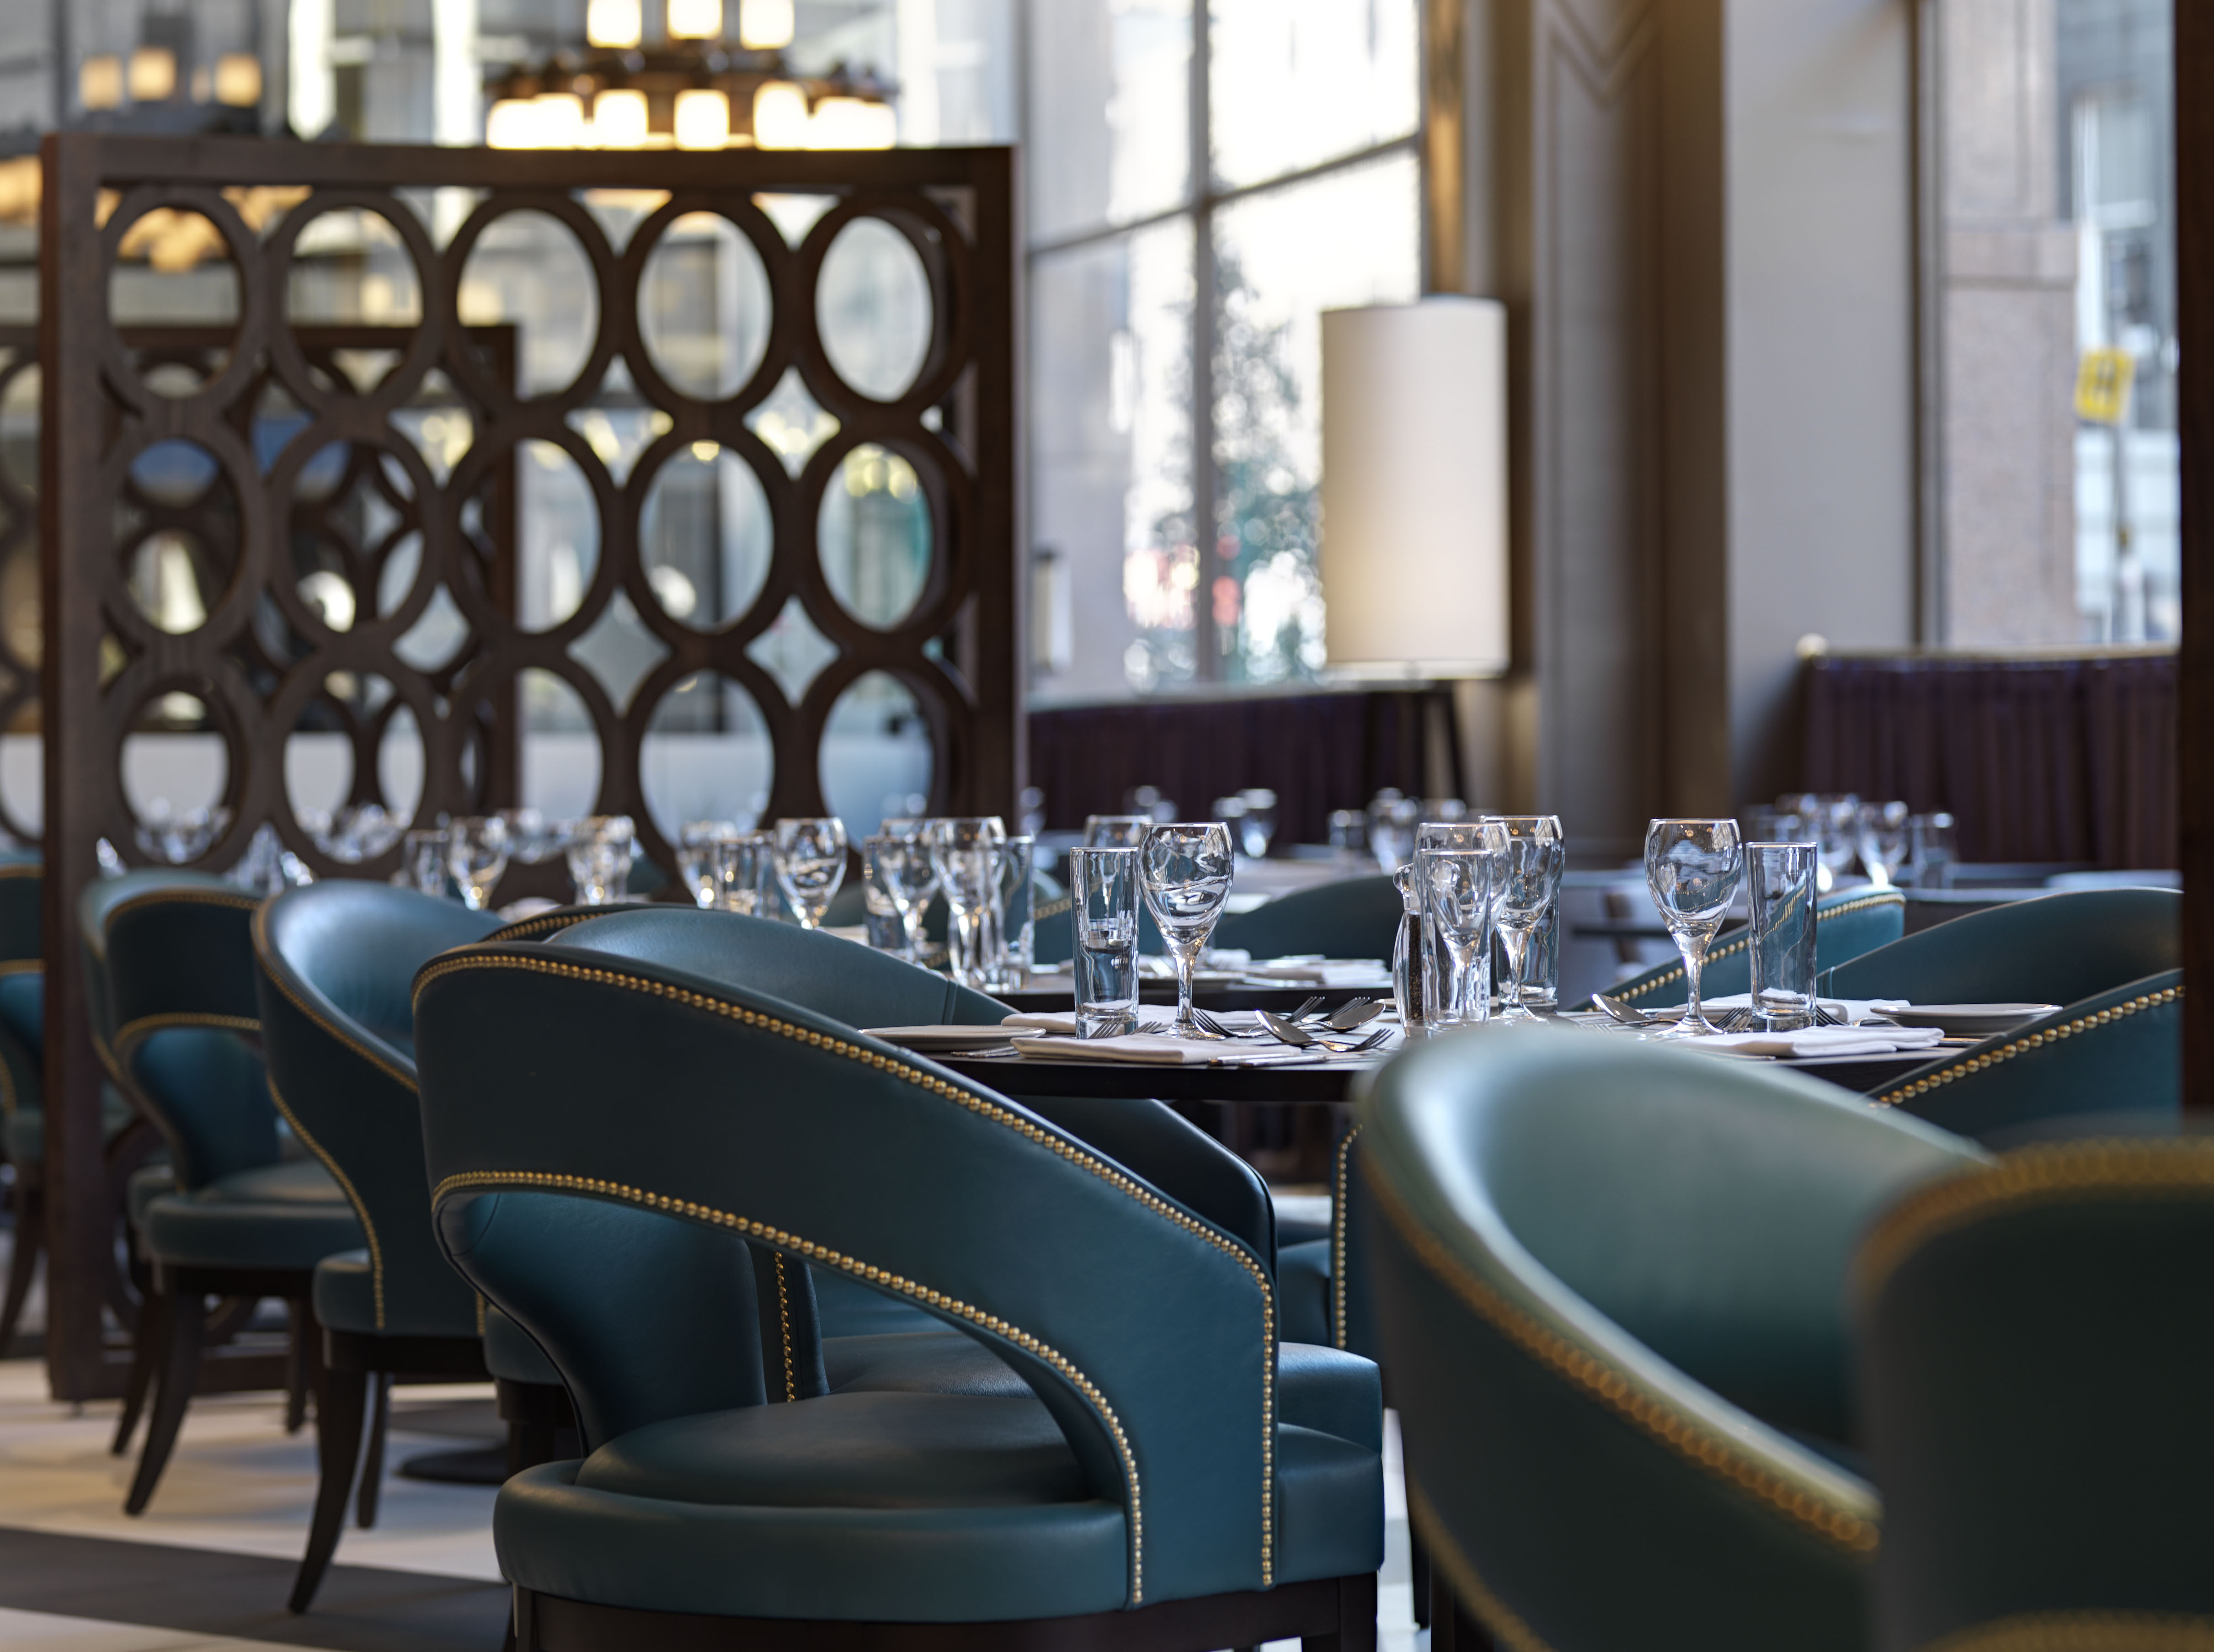 Green Chairs and Dining Tables With Place Settings and Glasses in Bread Street Brasserie Restaurant